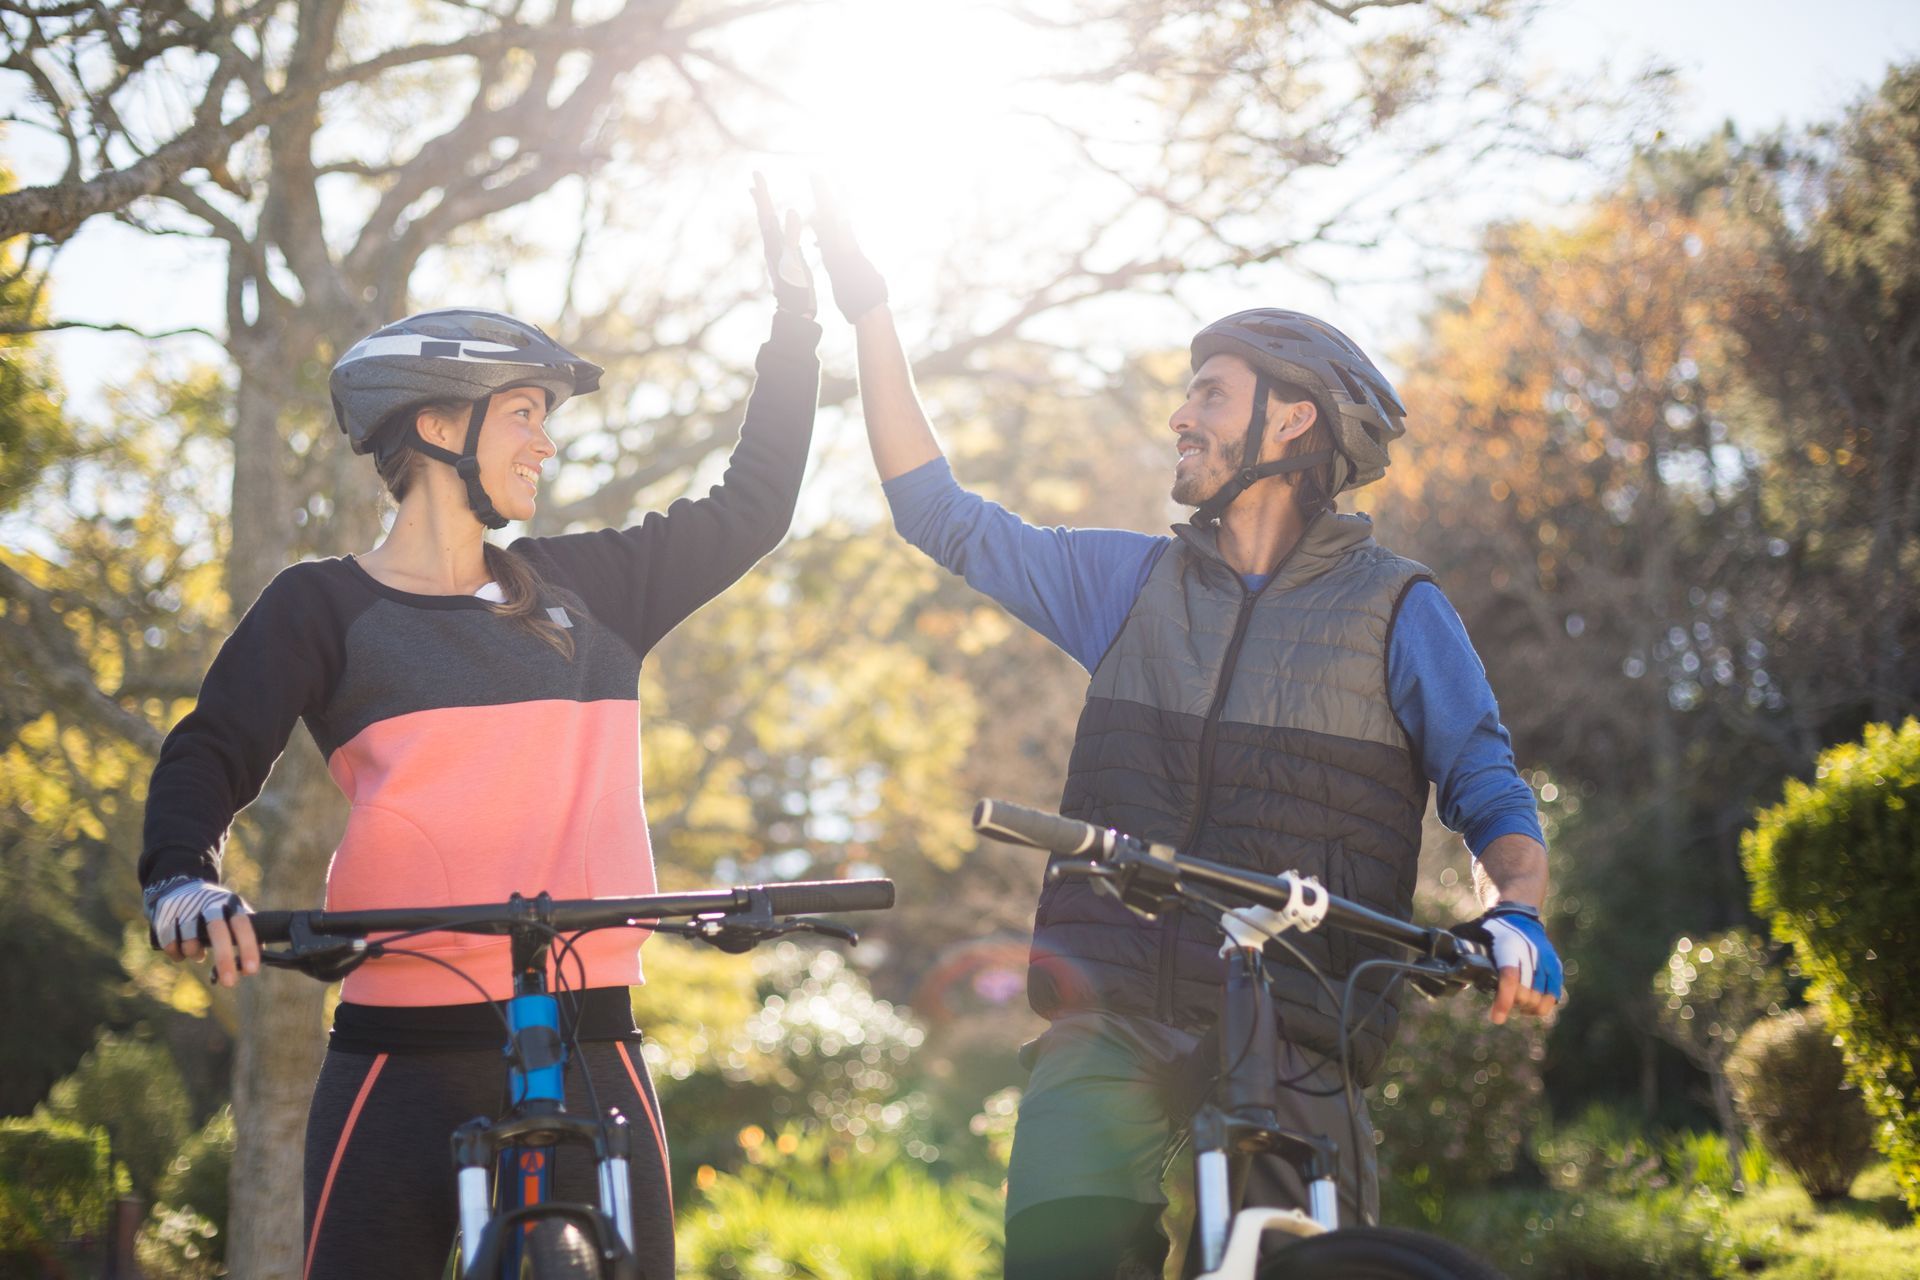 Male and female bicycle riders giving each other the High Five hand gesture, smiling